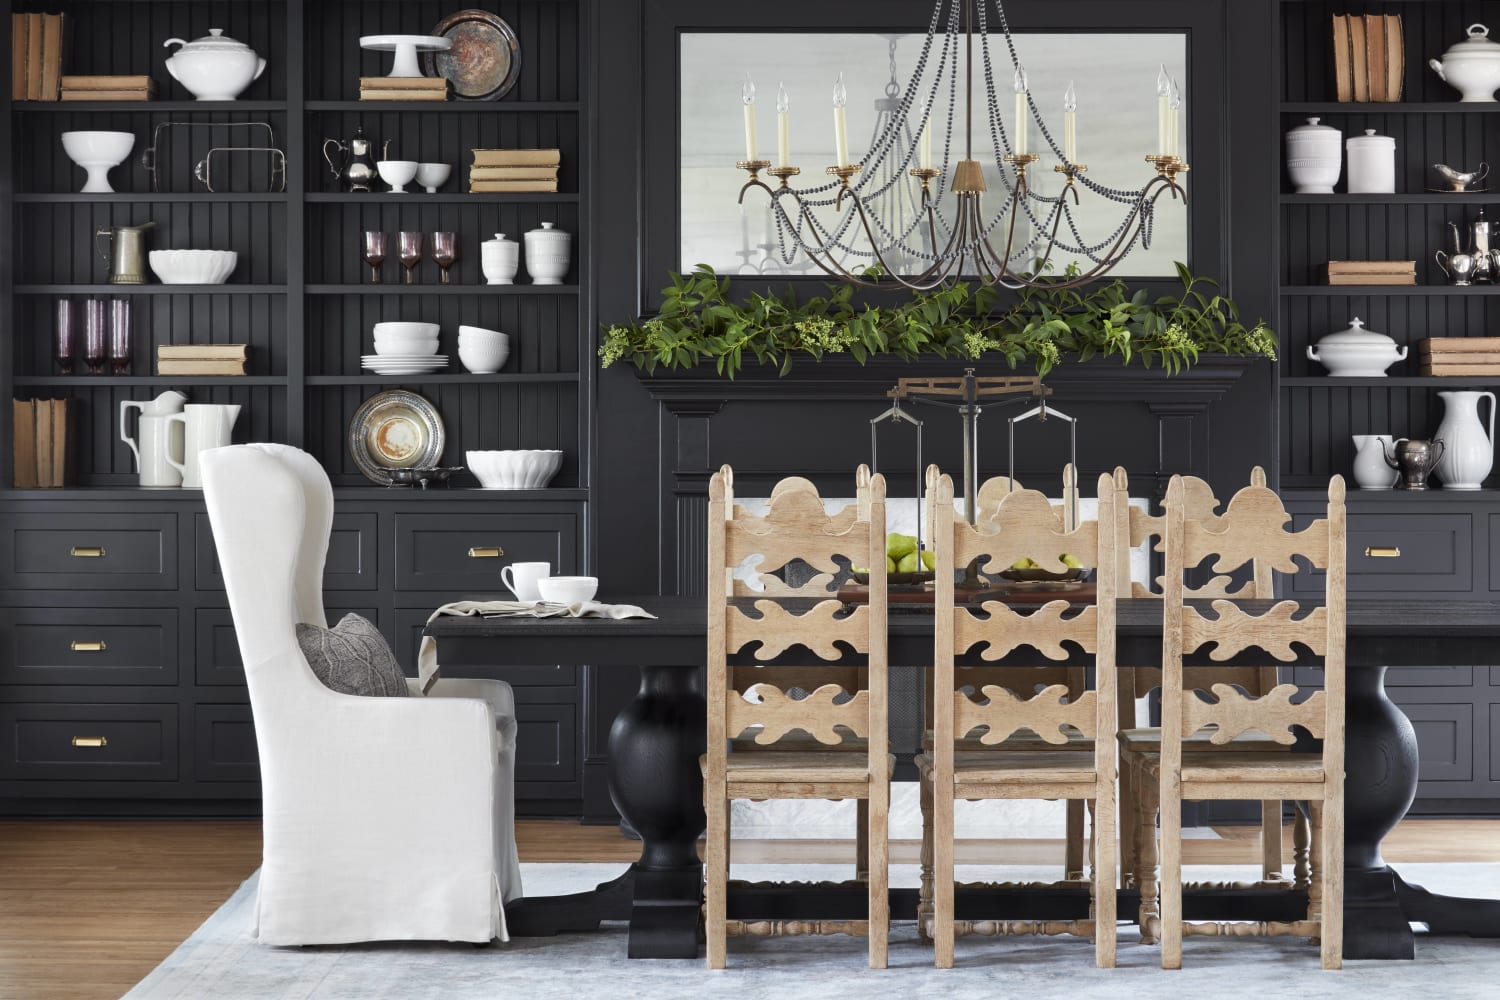 Black dining room with built-ins, fireplace, and a mix of dining chairs - Magnolia House in McGregor, TX.